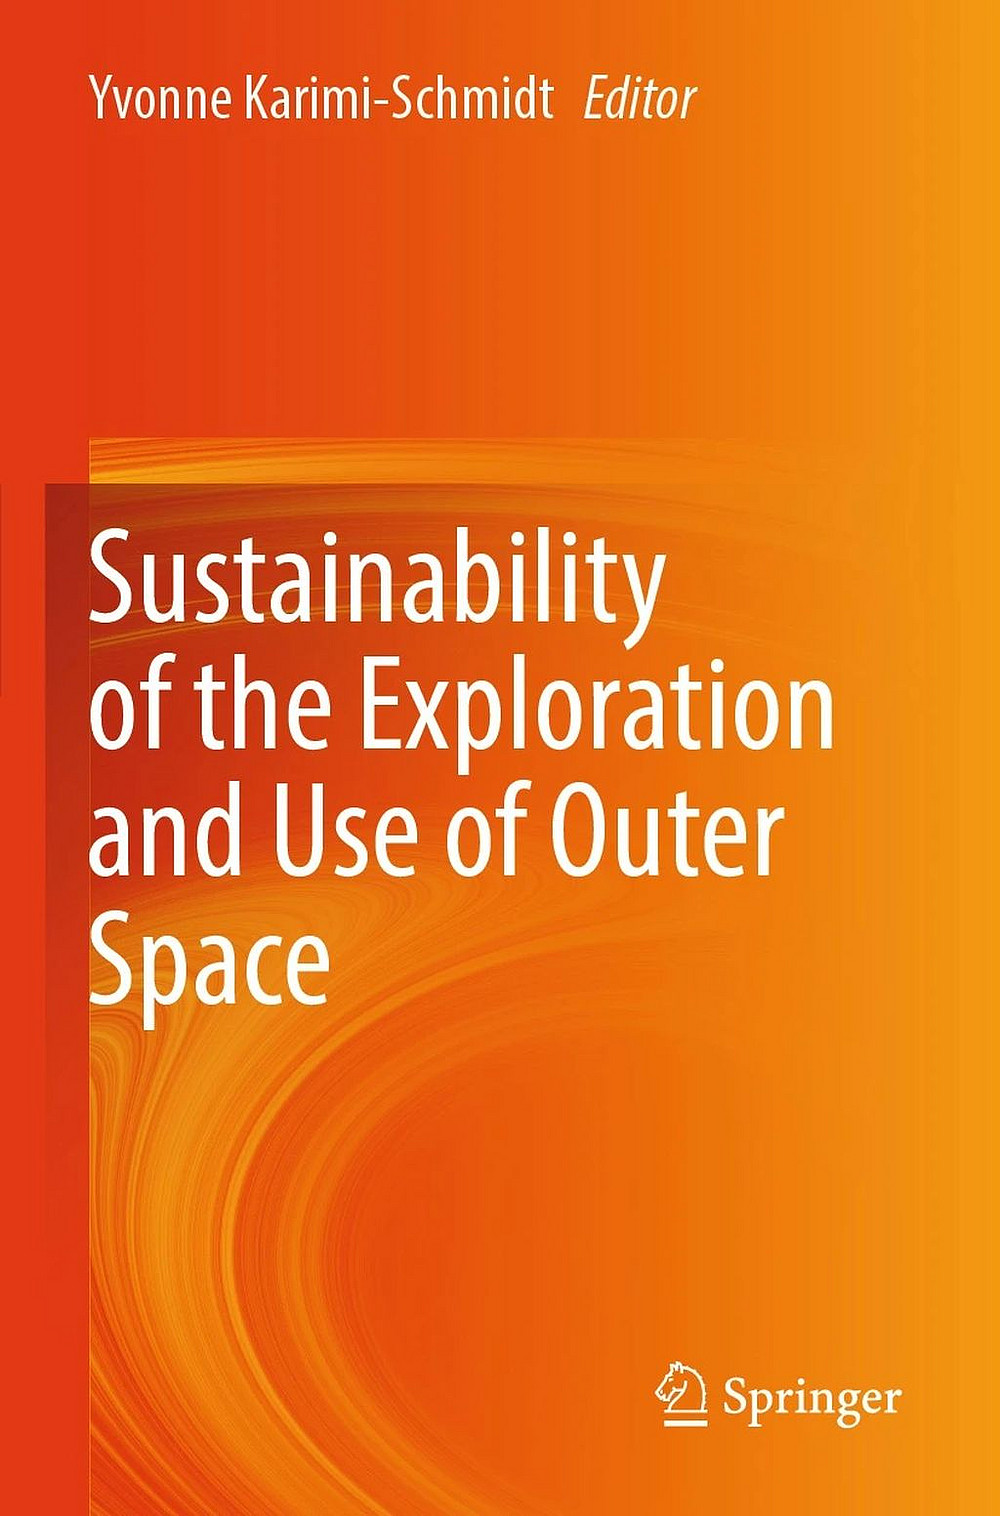 Sustainability of the Exploration and Use of Outer Space ©Springer Verlag